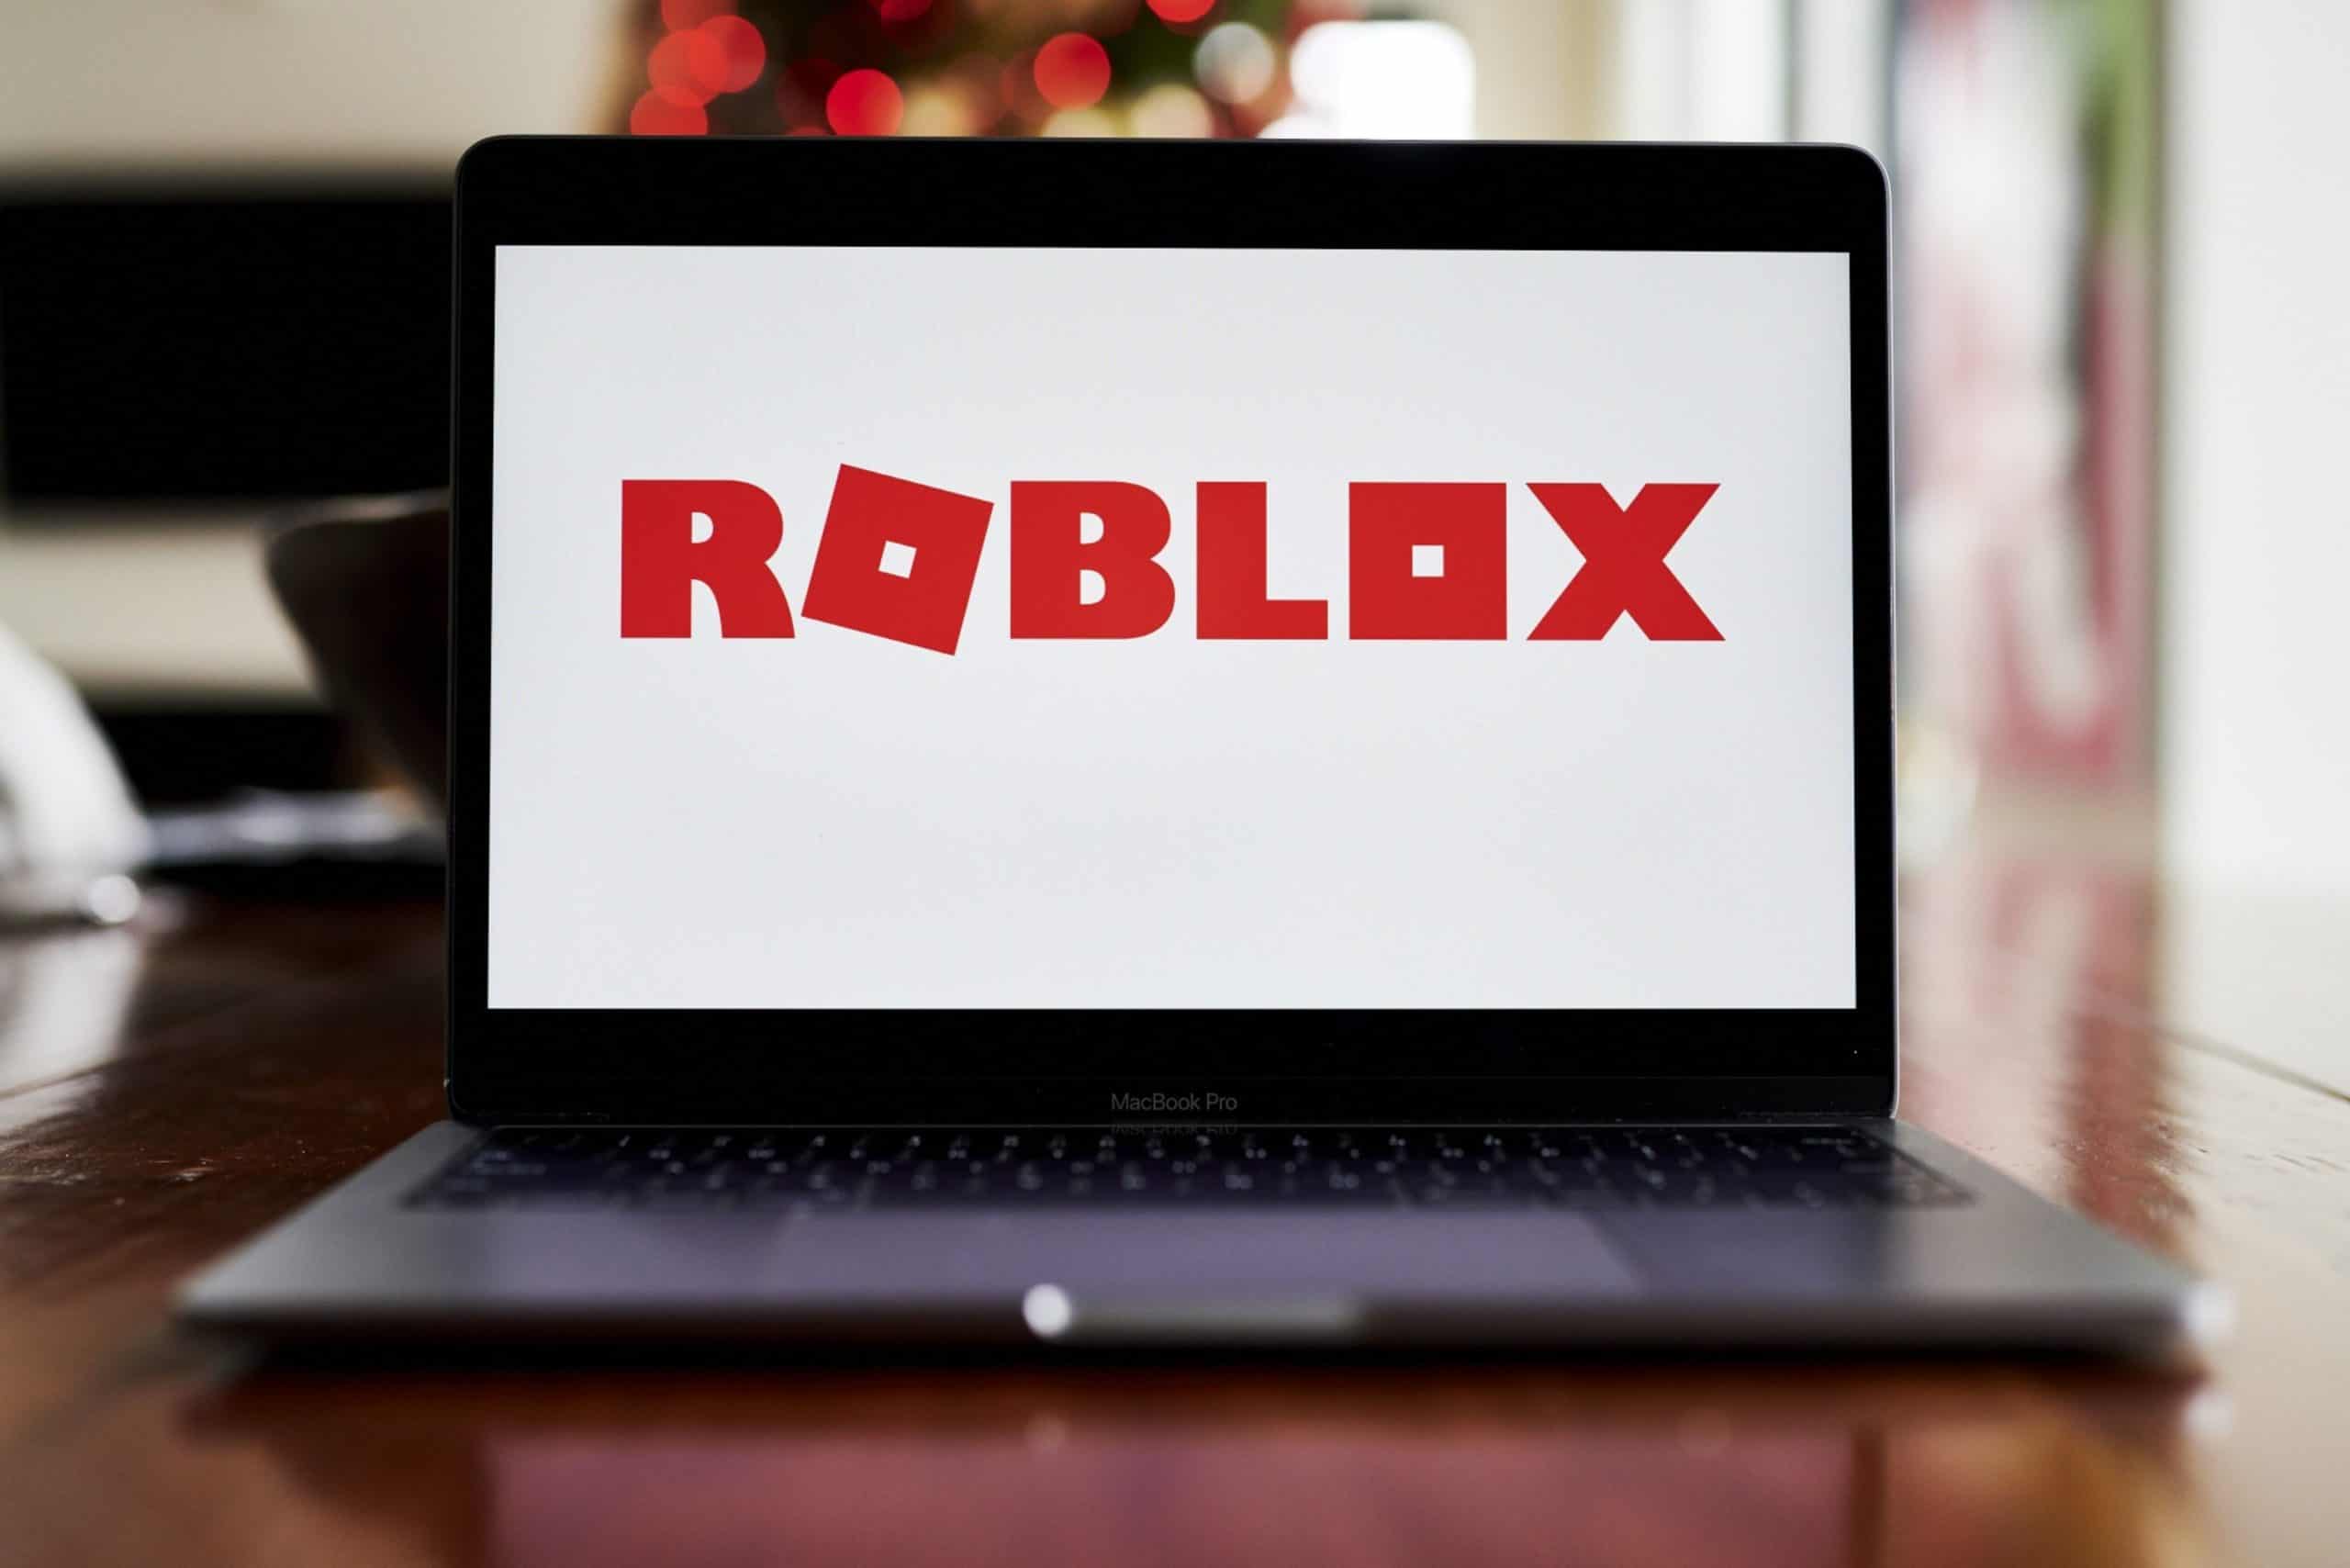 Roblox goes public at $41.9 billion valuation in direct listing